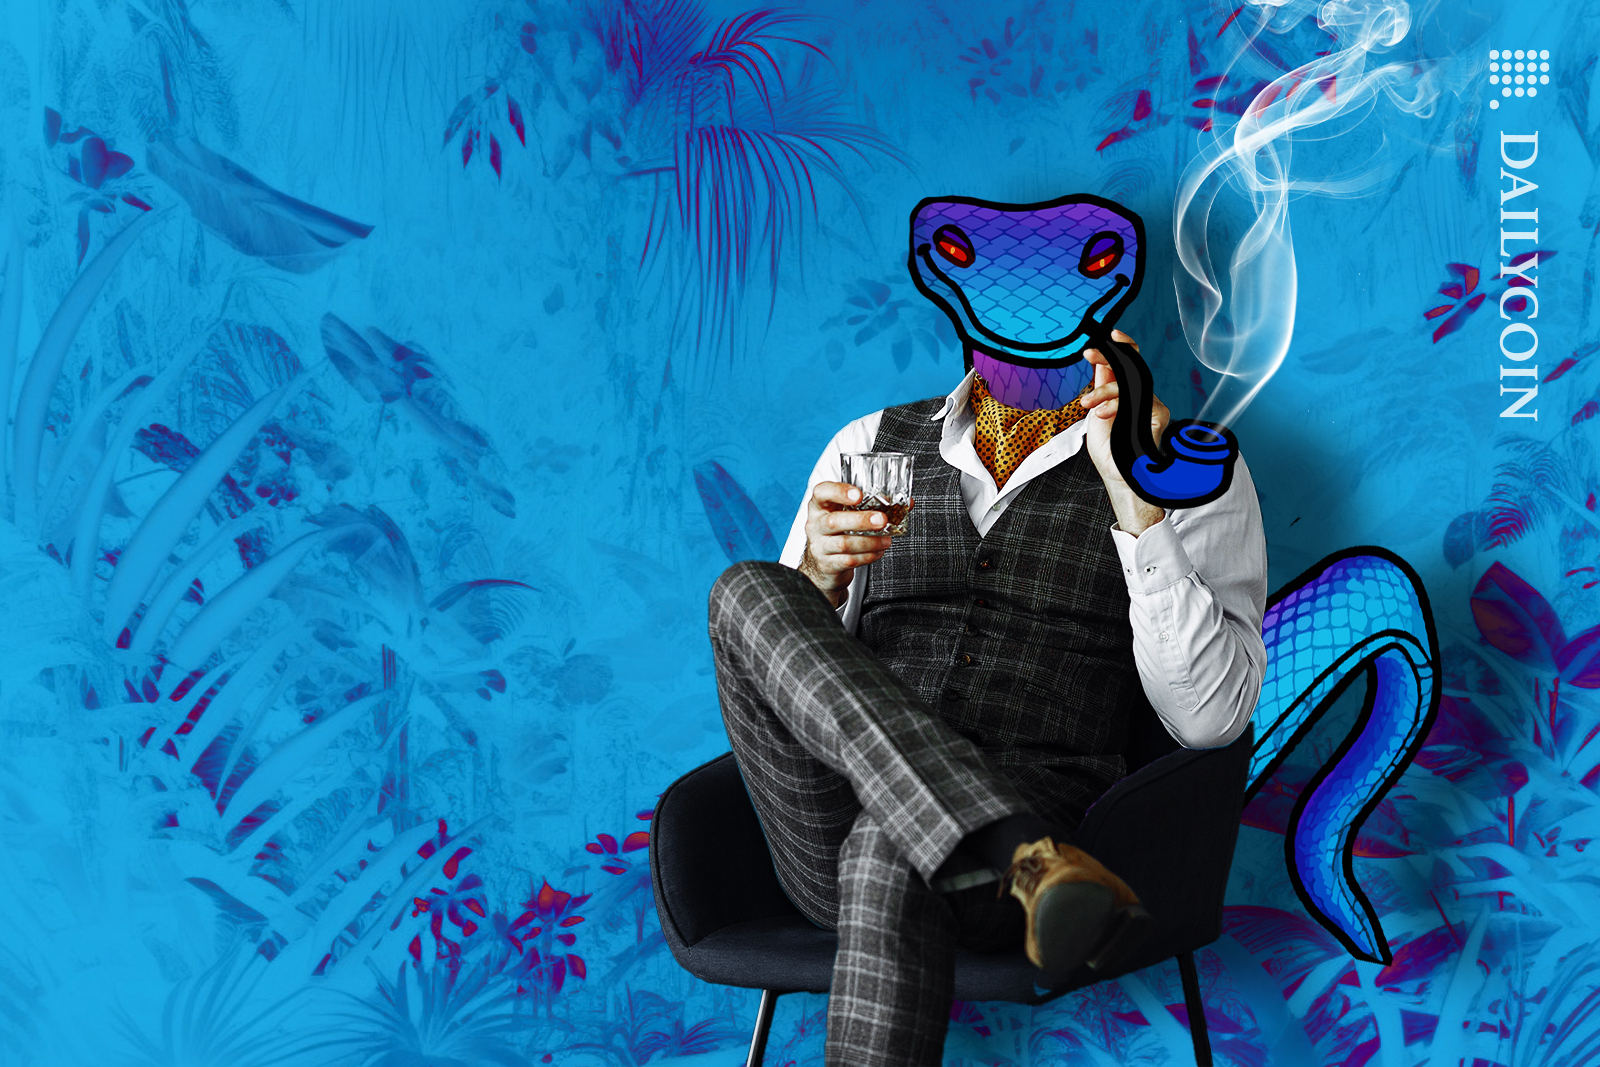 Snek character sitting with a glass smoking his pipe.